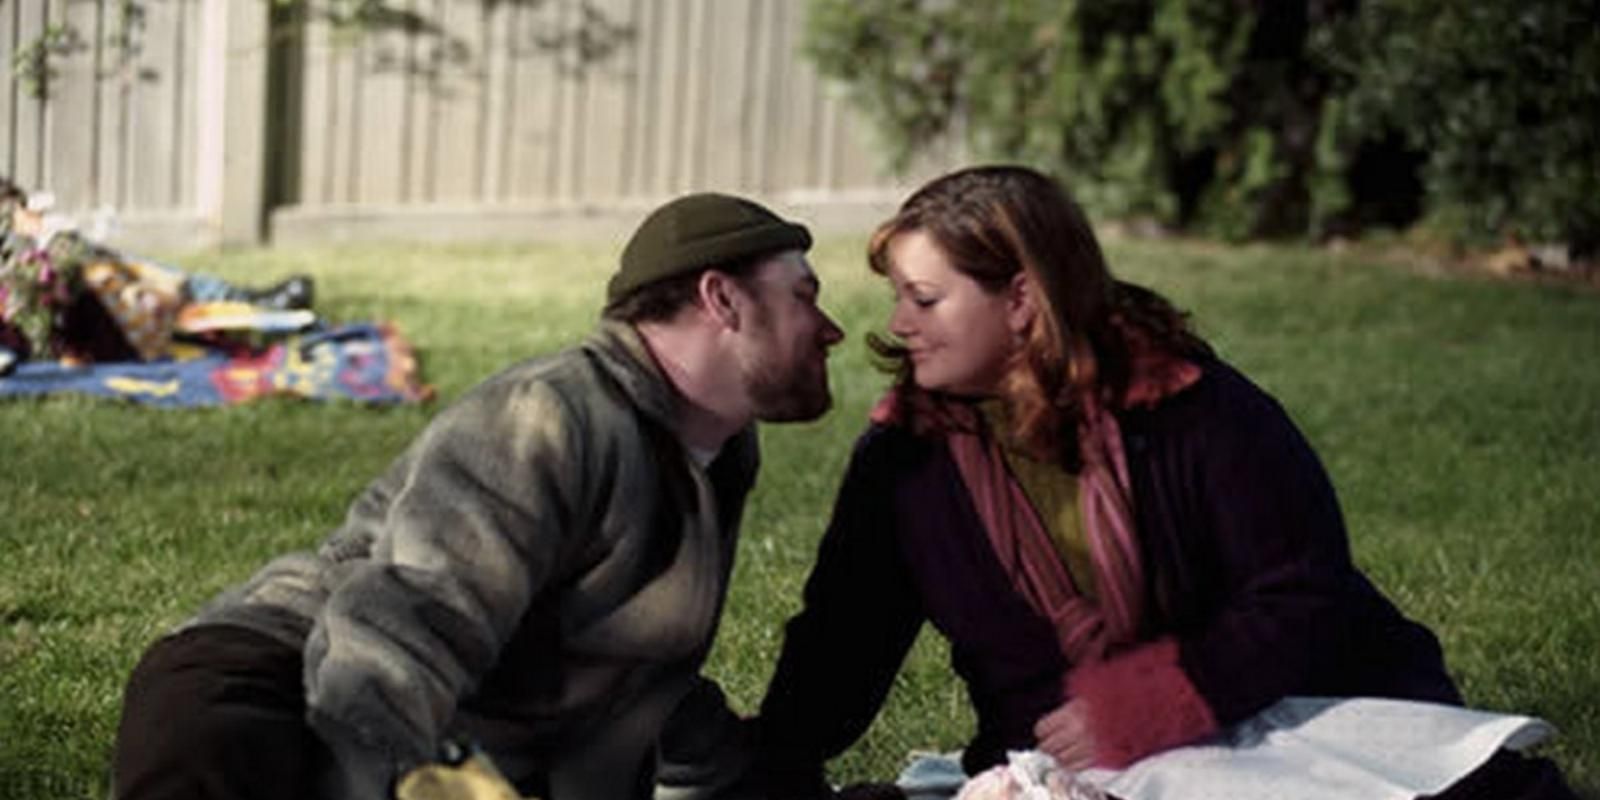 Sookie St James and Jackson Belleville on their picnic date in Gilmore Girls